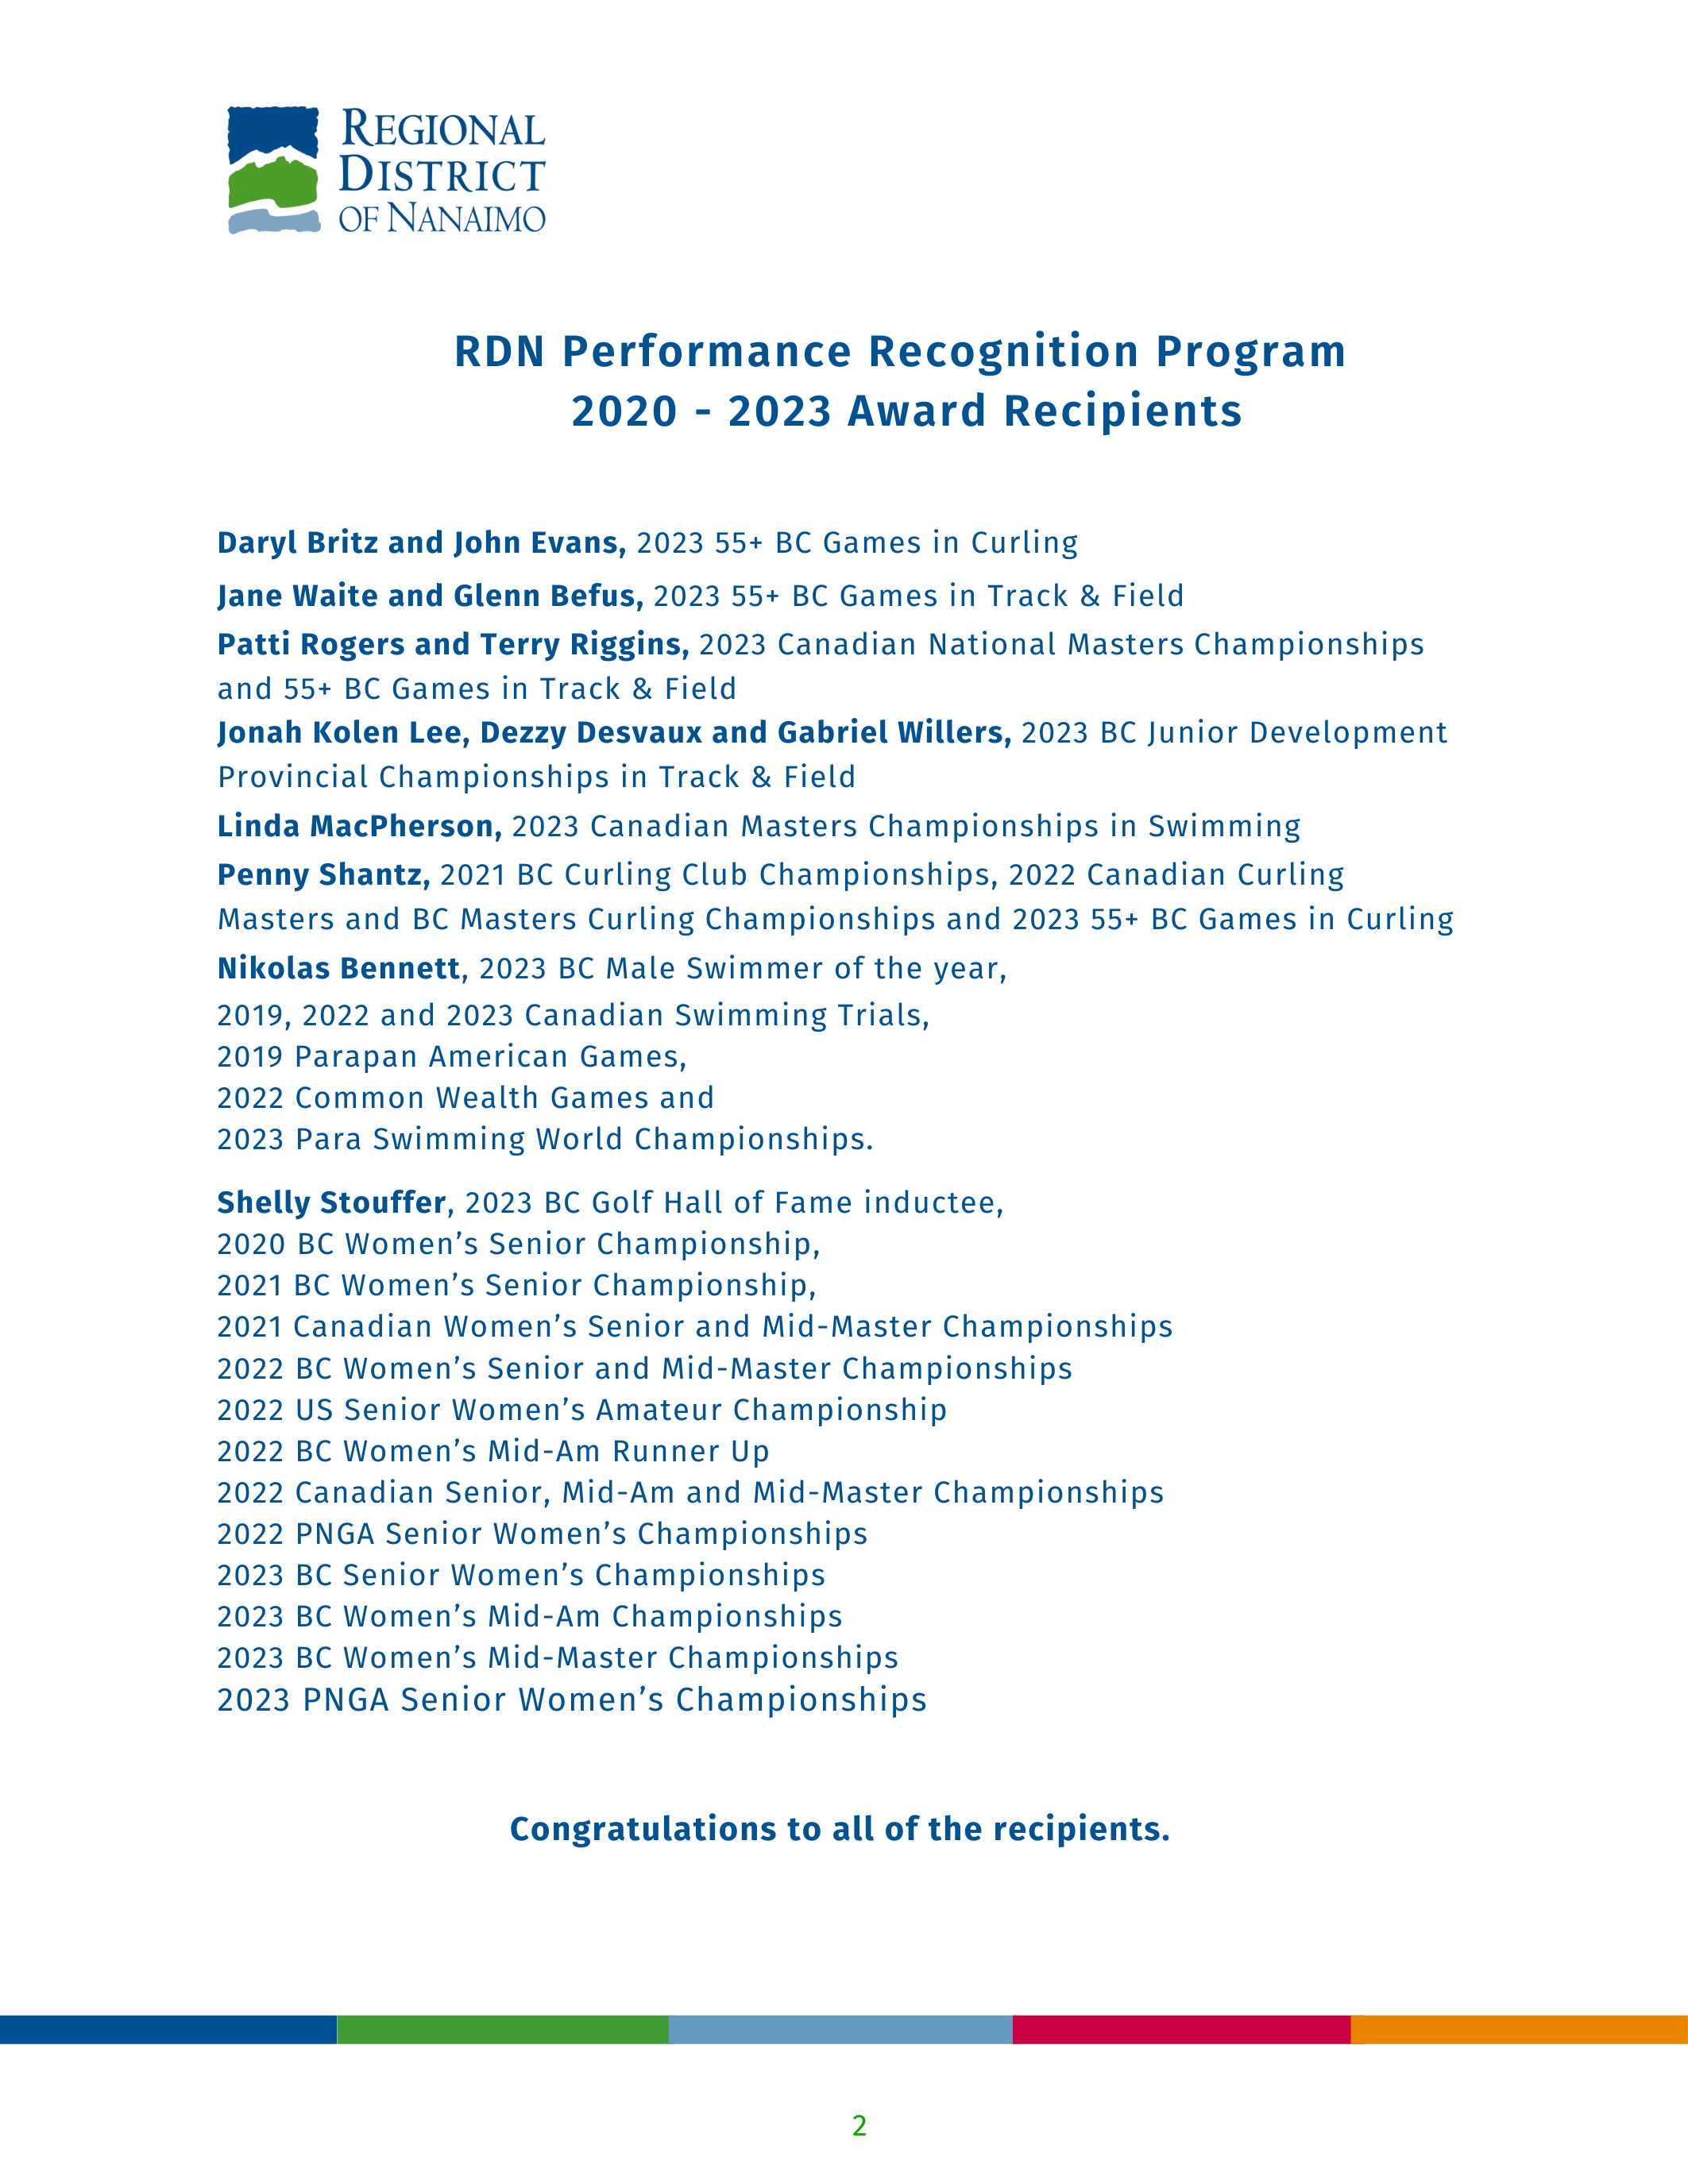 Performance Award Recipients page 2